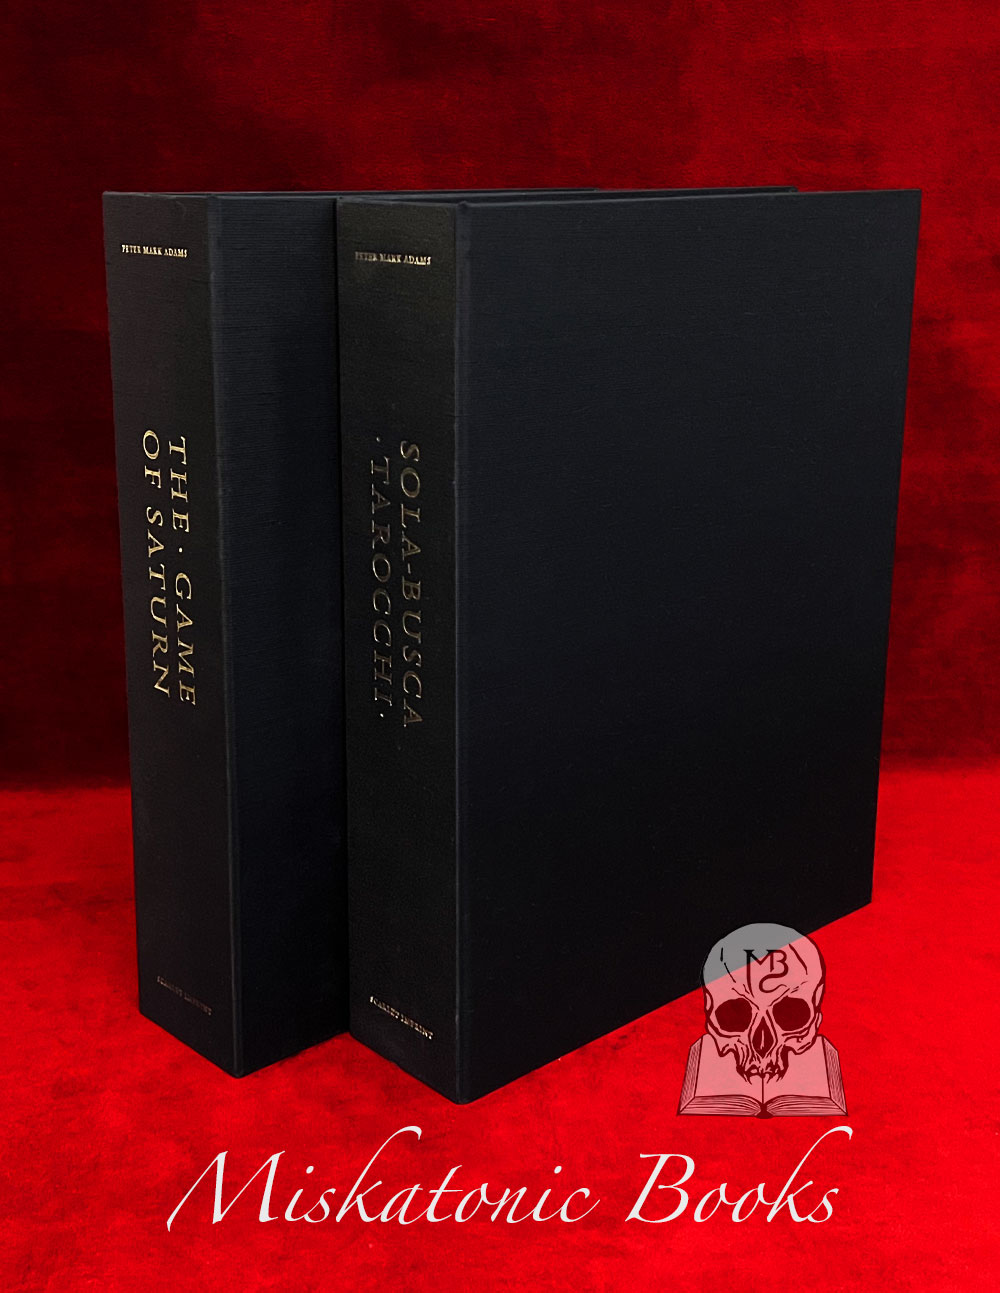 THE GAME OF SATURN & SOLA- BUSCA TAROCCHI TAROT by Peter Mark Adams (DELUXE 2 Volume Set of Book Bound in Black Python and Shantung with Custom Traycase & Deluxe Edition of the Tarot in Traycase)